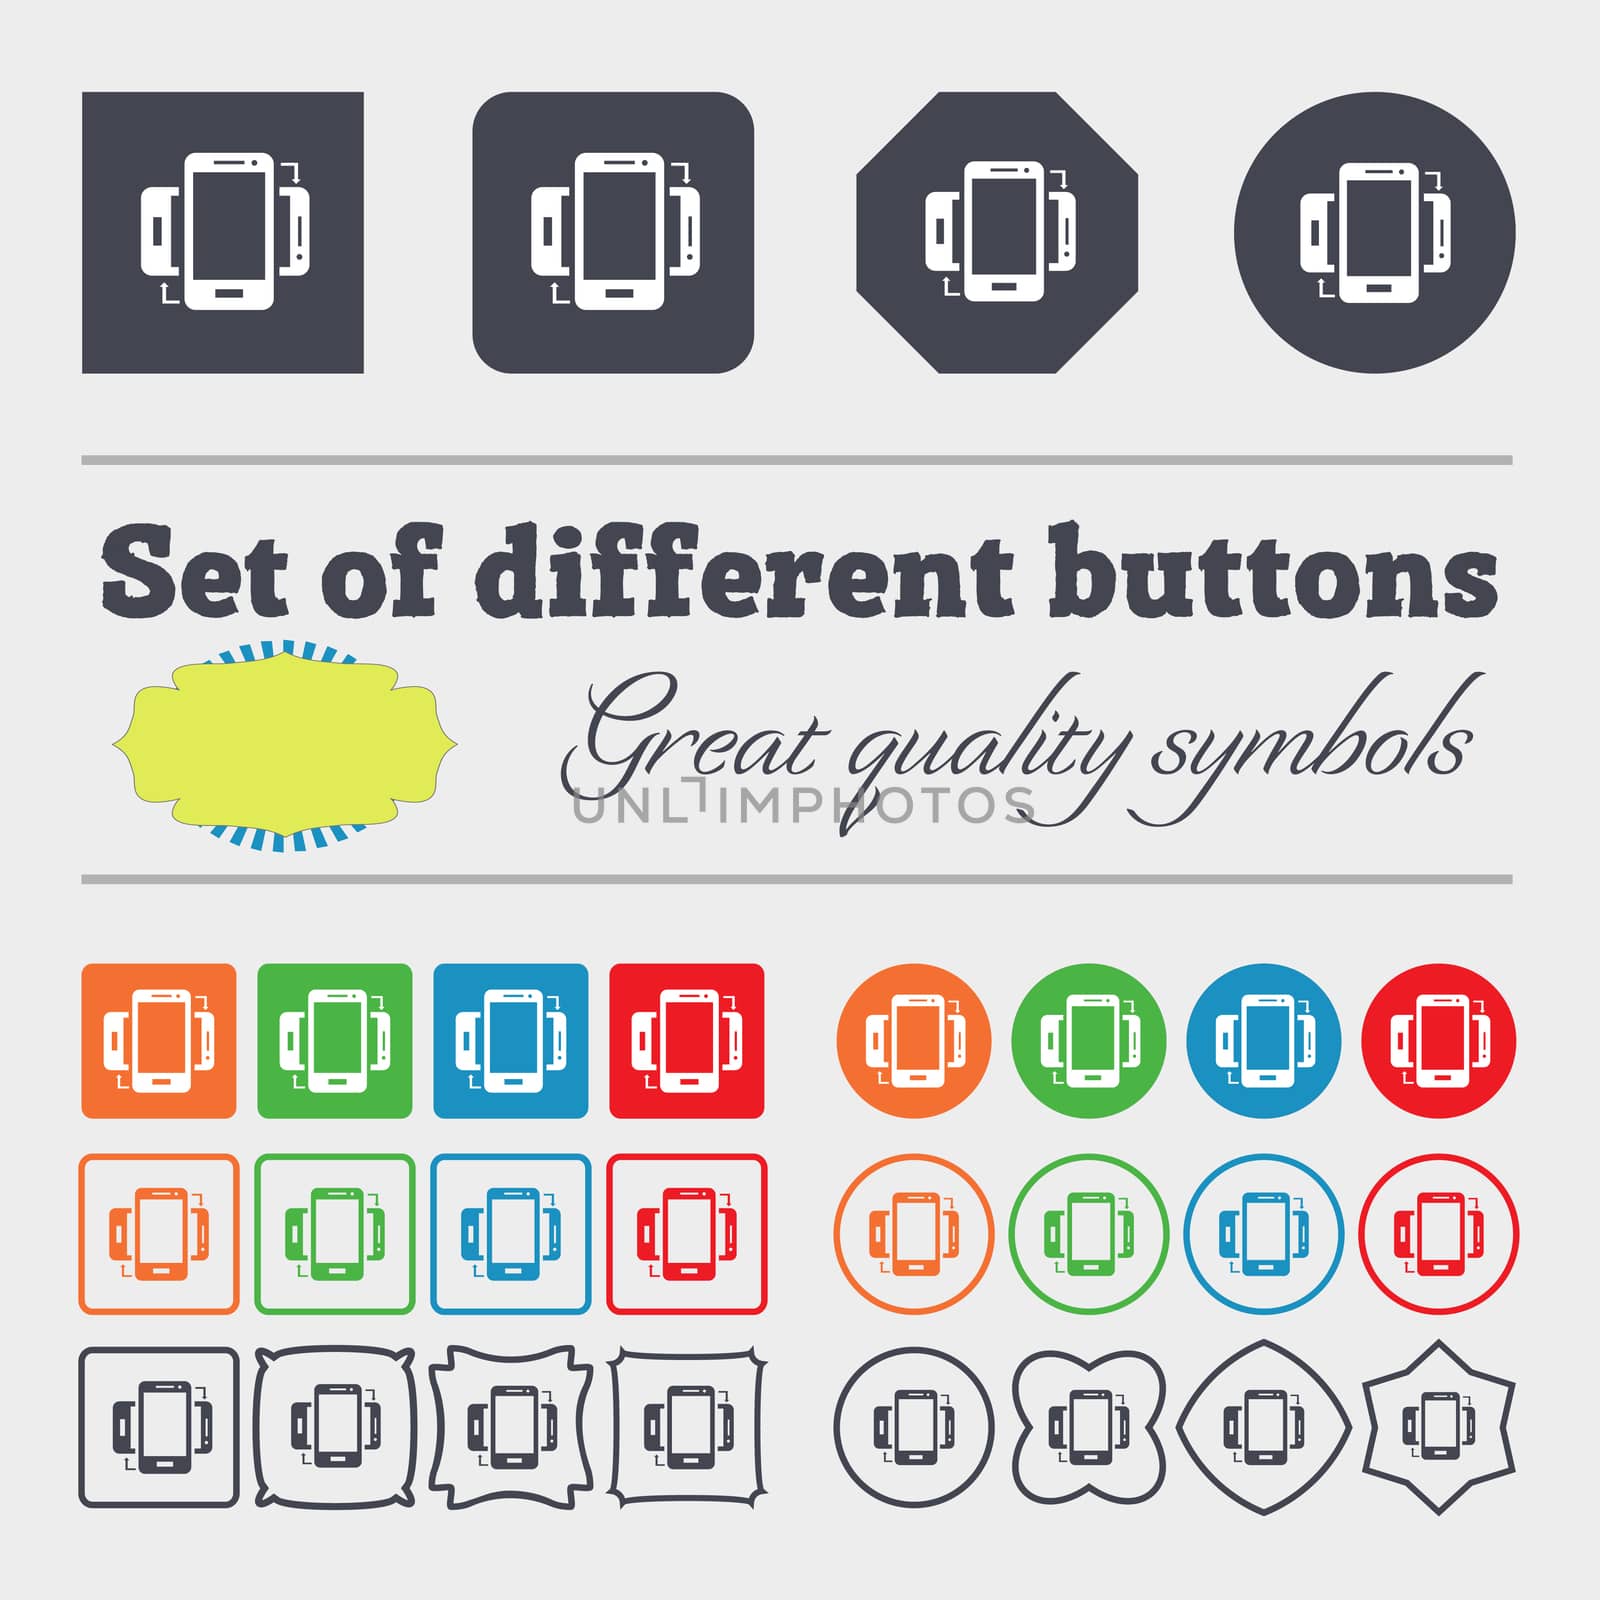 Synchronization sign icon. smartphones sync symbol. Data exchange. Big set of colorful, diverse, high-quality buttons. illustration